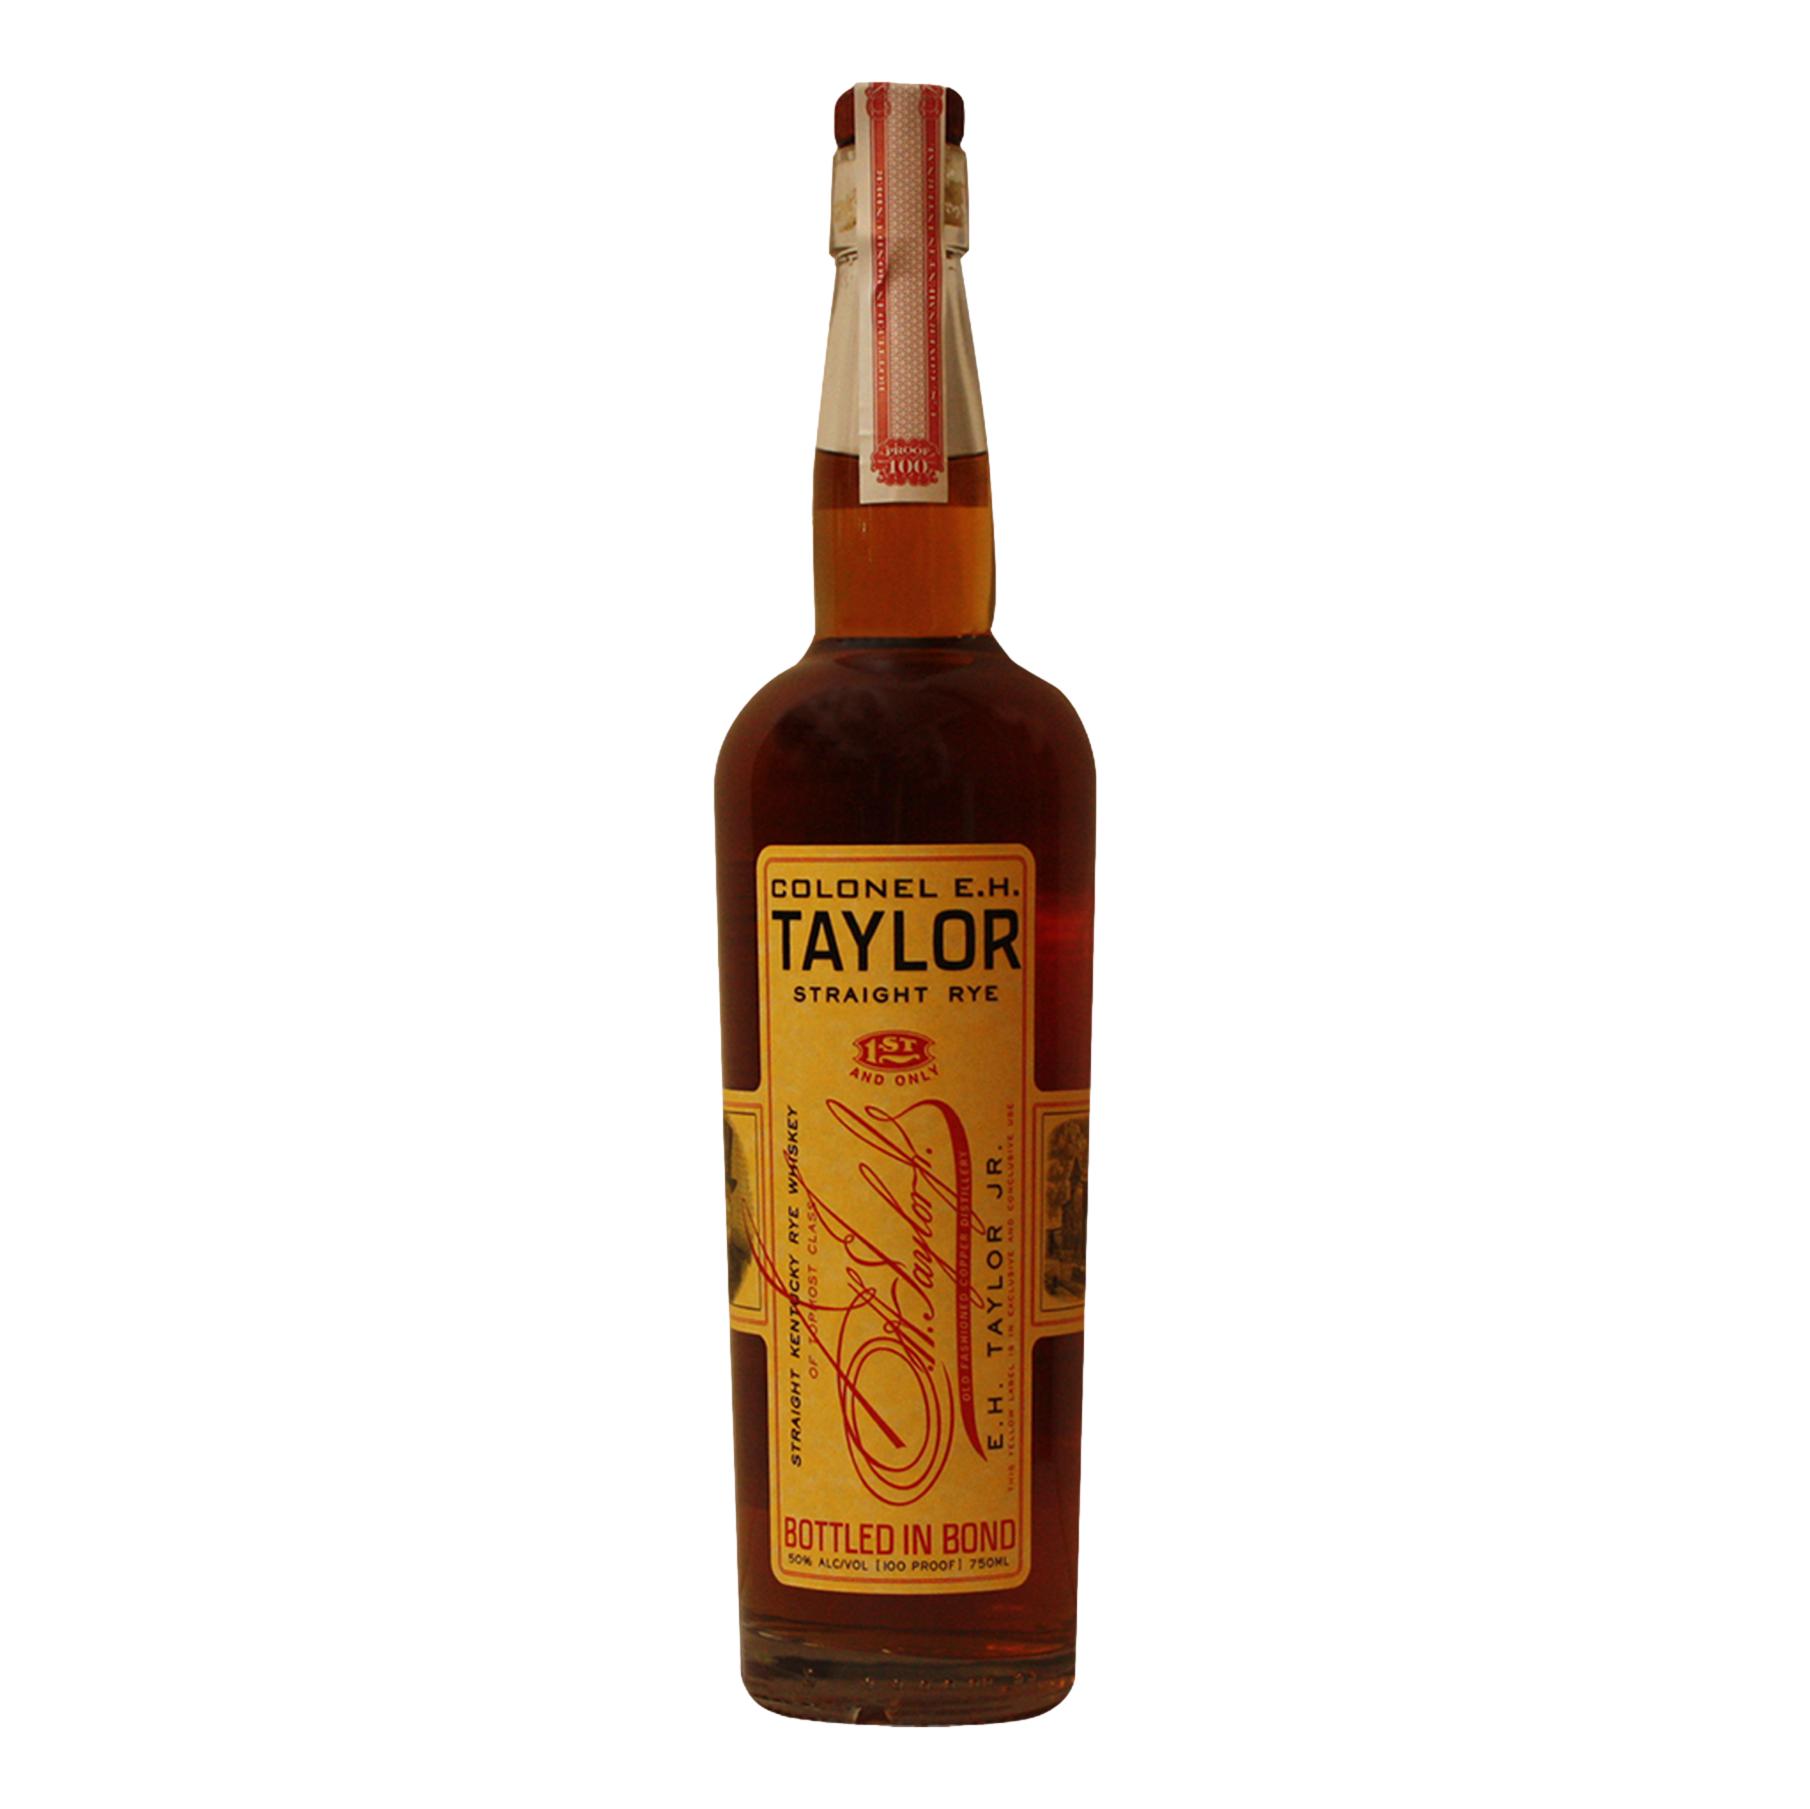 Colonel E.H. Taylor Straight Rye Bourbon Whiskey 750ml